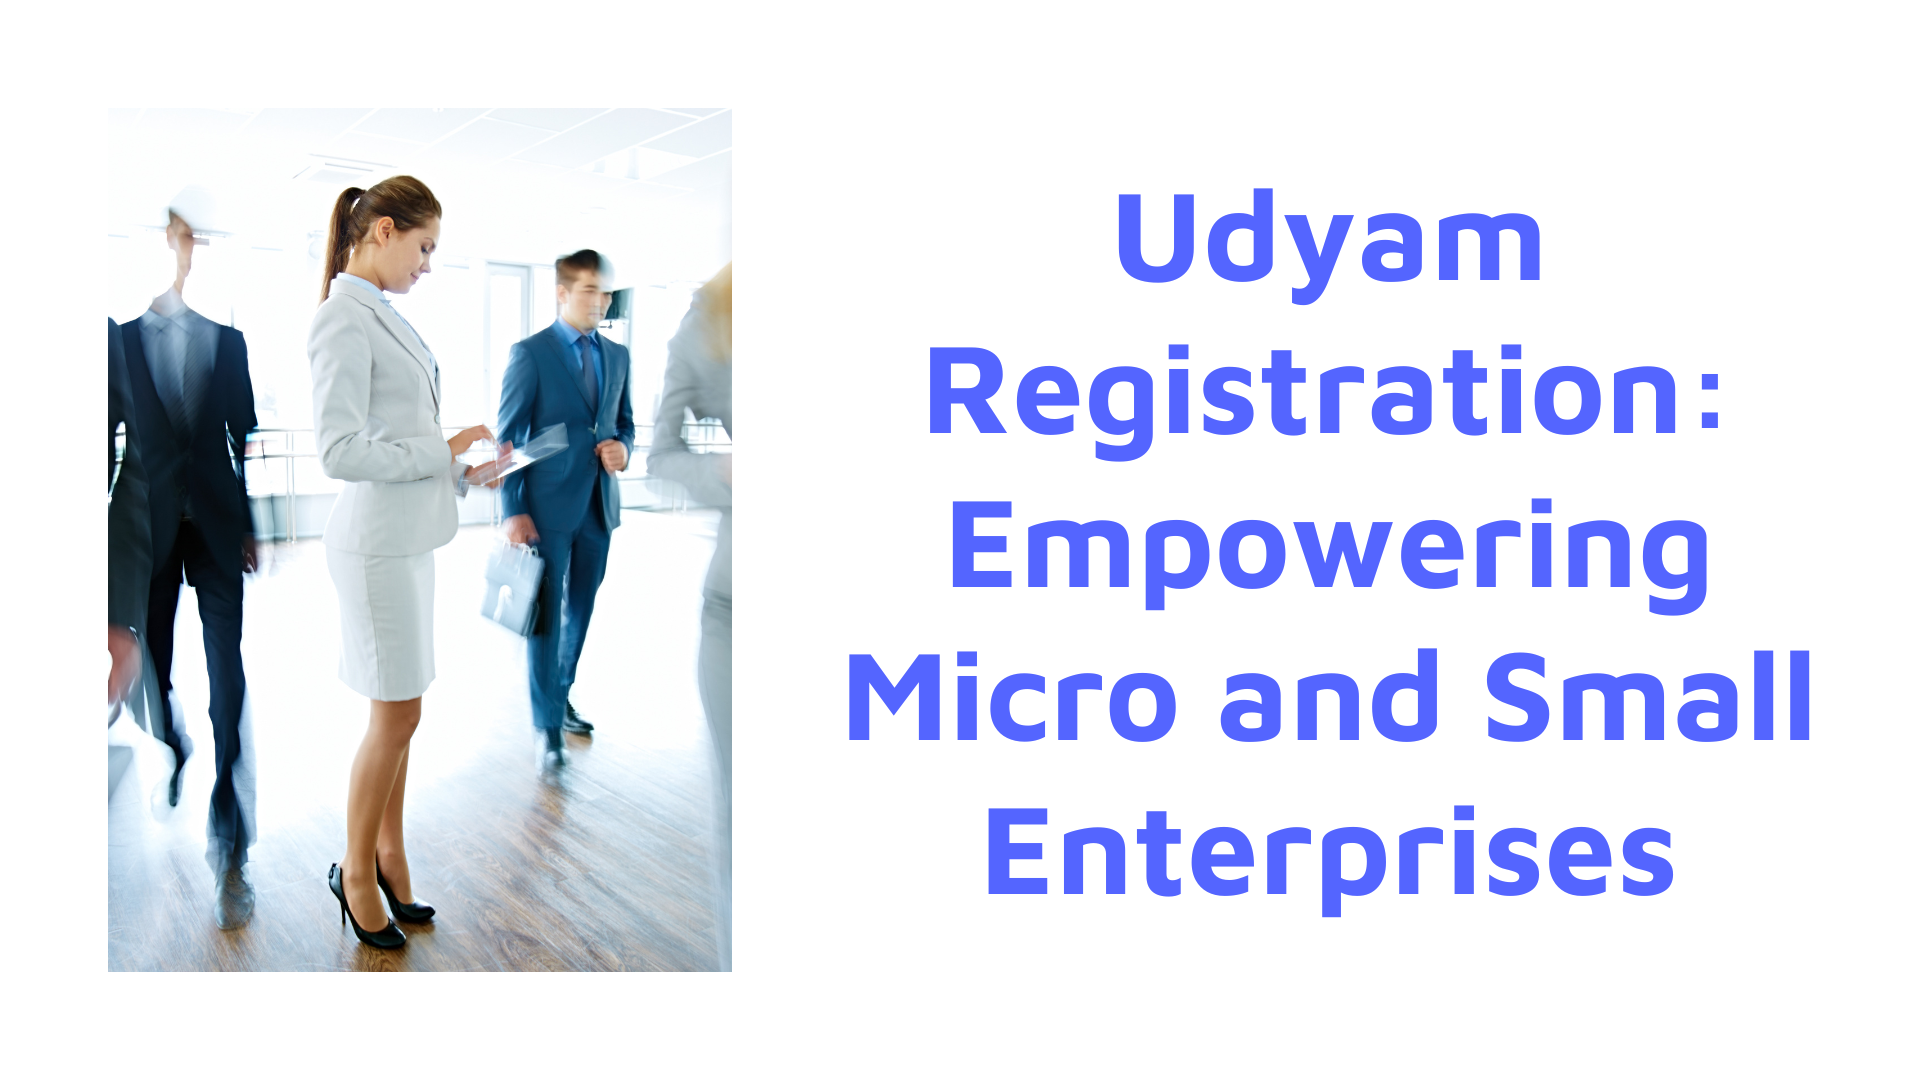 Udyam Registration Empowering Micro and Small Enterprises